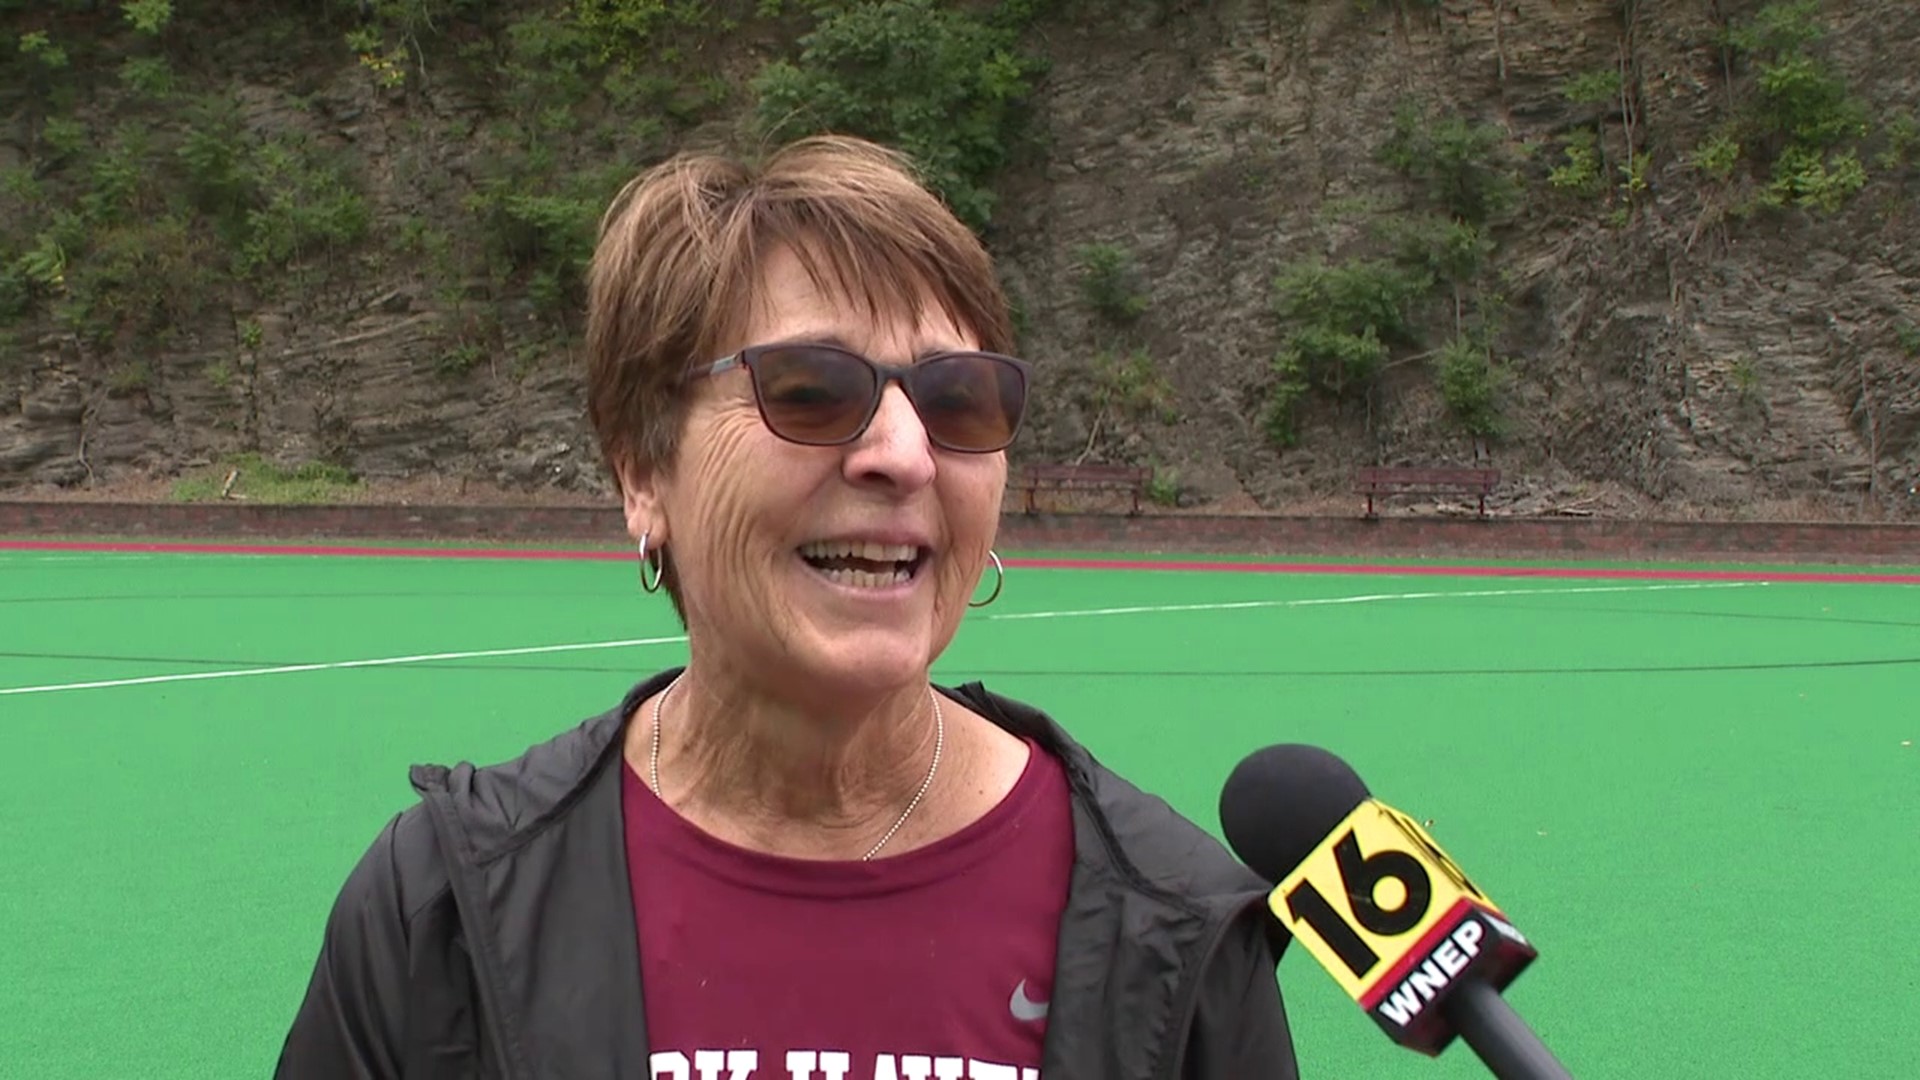 Pat Rudy coached field hockey for 45 years and won 634 games. More than half of those wins were with Lock Haven University.